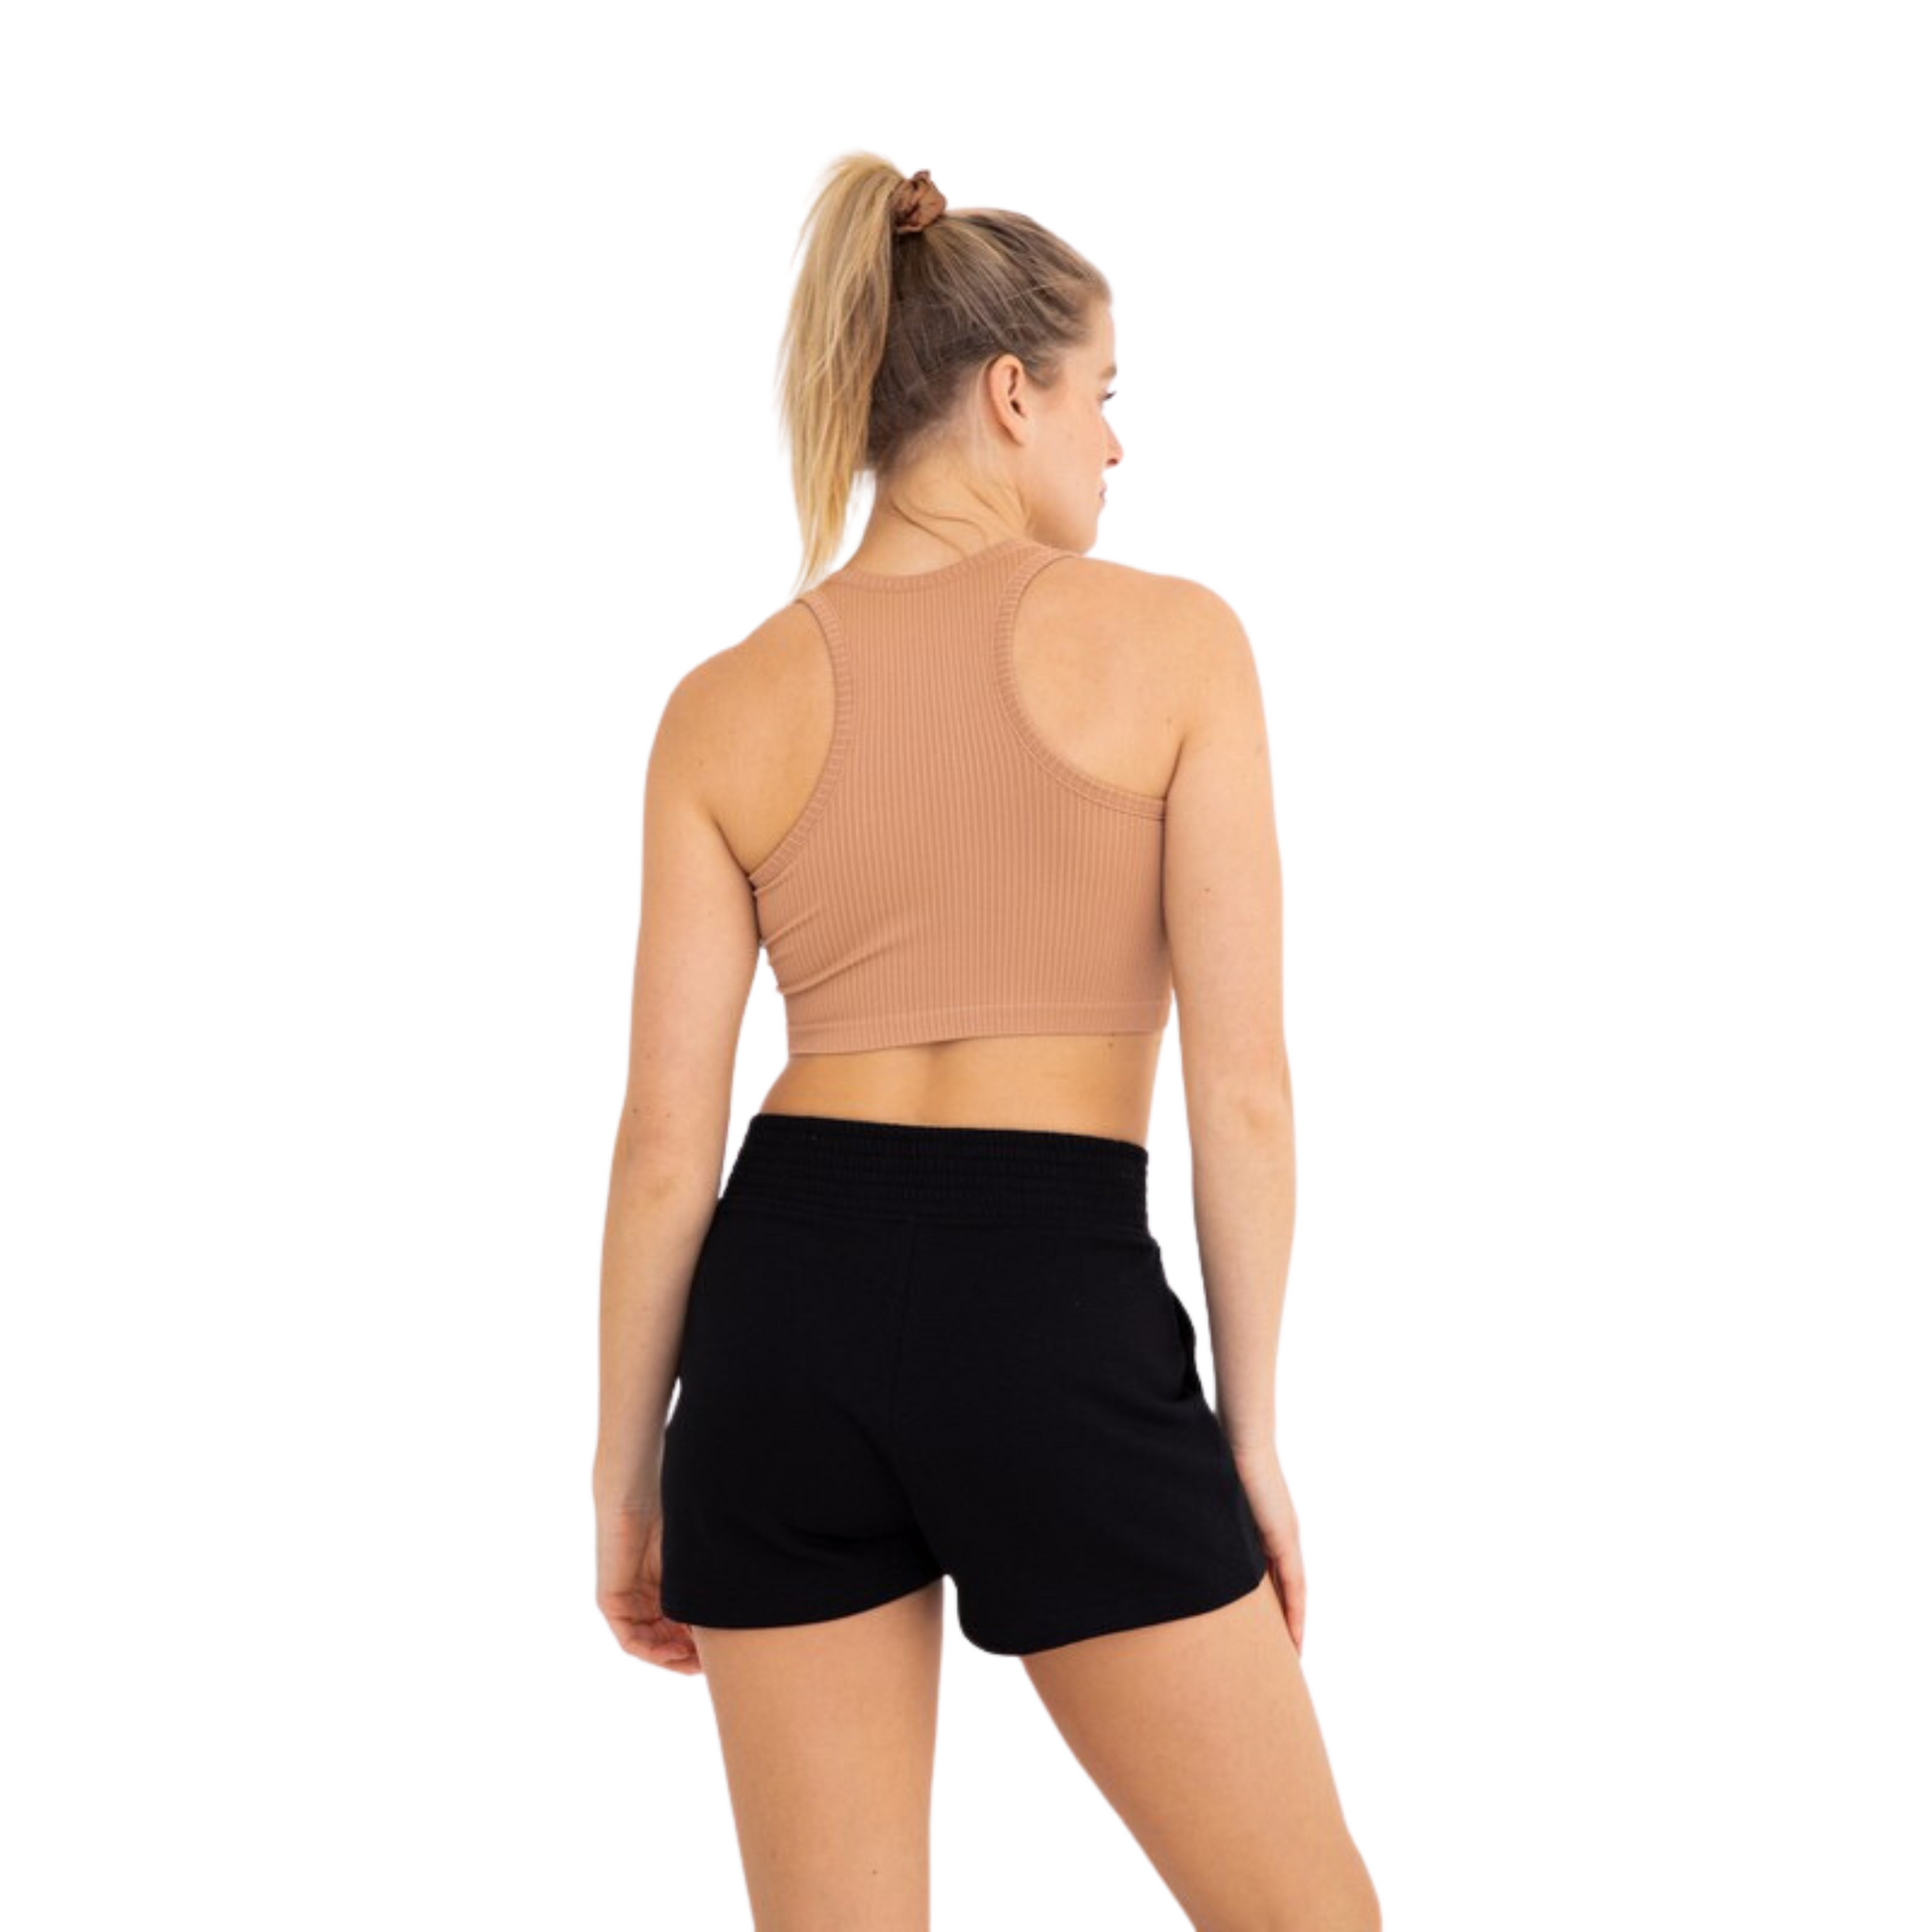 This Cropped Racerback Tank is the perfect addition to your wardrobe. It features a ribbed knit, offering superior breathability and comfort. The tank is available in a black or mud color. Its cropped fit adds extra style and flair, making it ideal for any occasion.